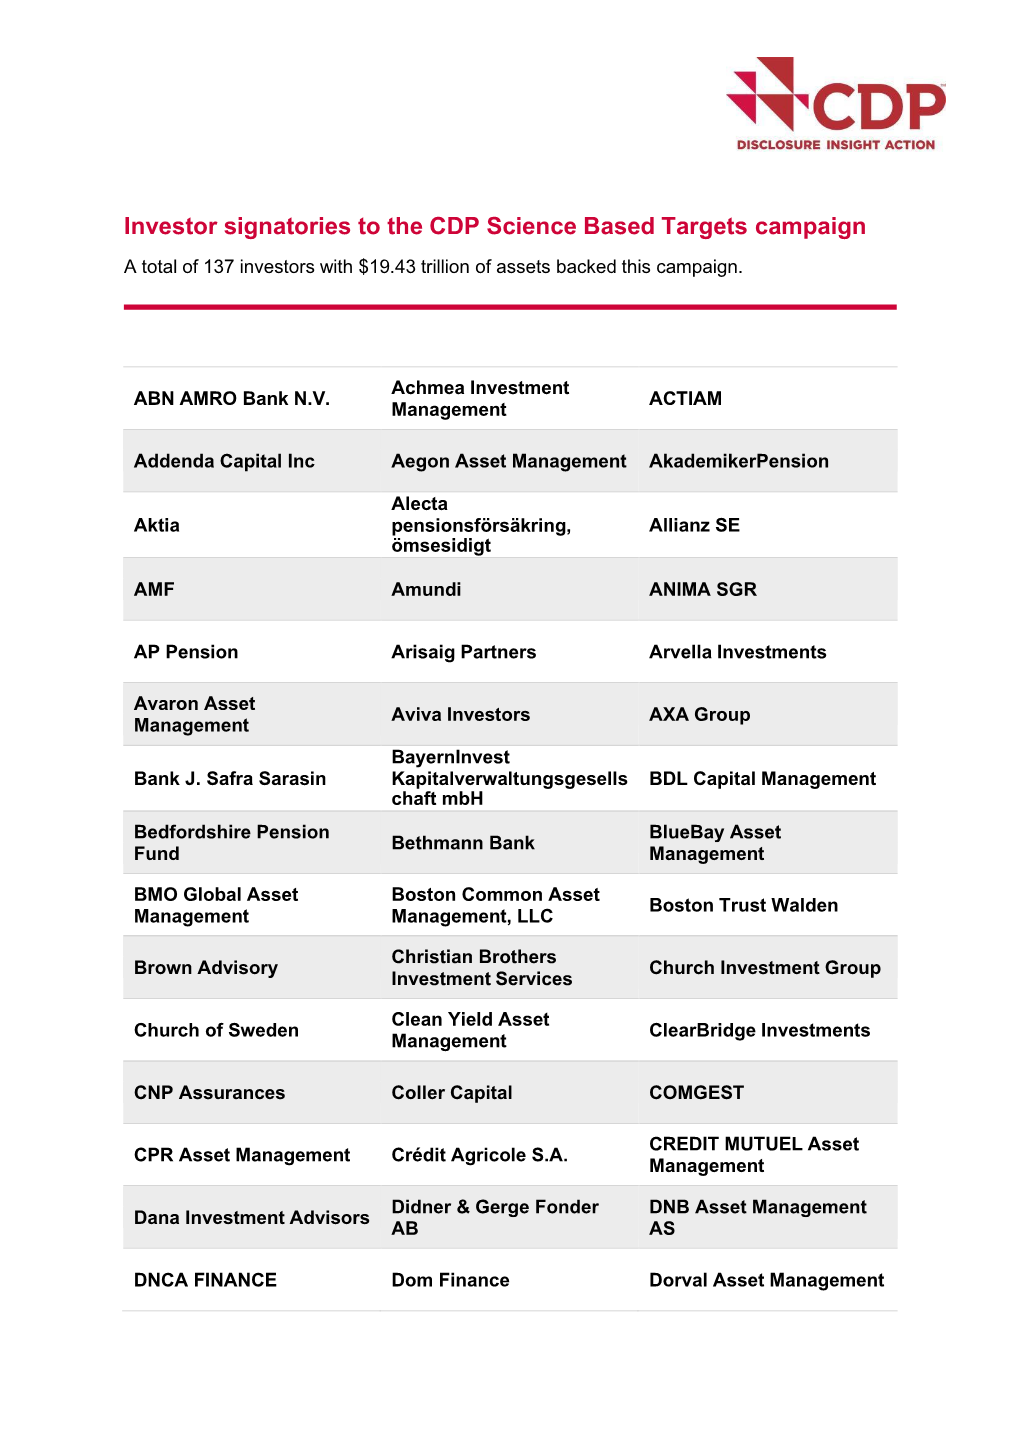 Investor Signatories to the CDP Science Based Targets Campaign a Total of 137 Investors with $19.43 Trillion of Assets Backed This Campaign